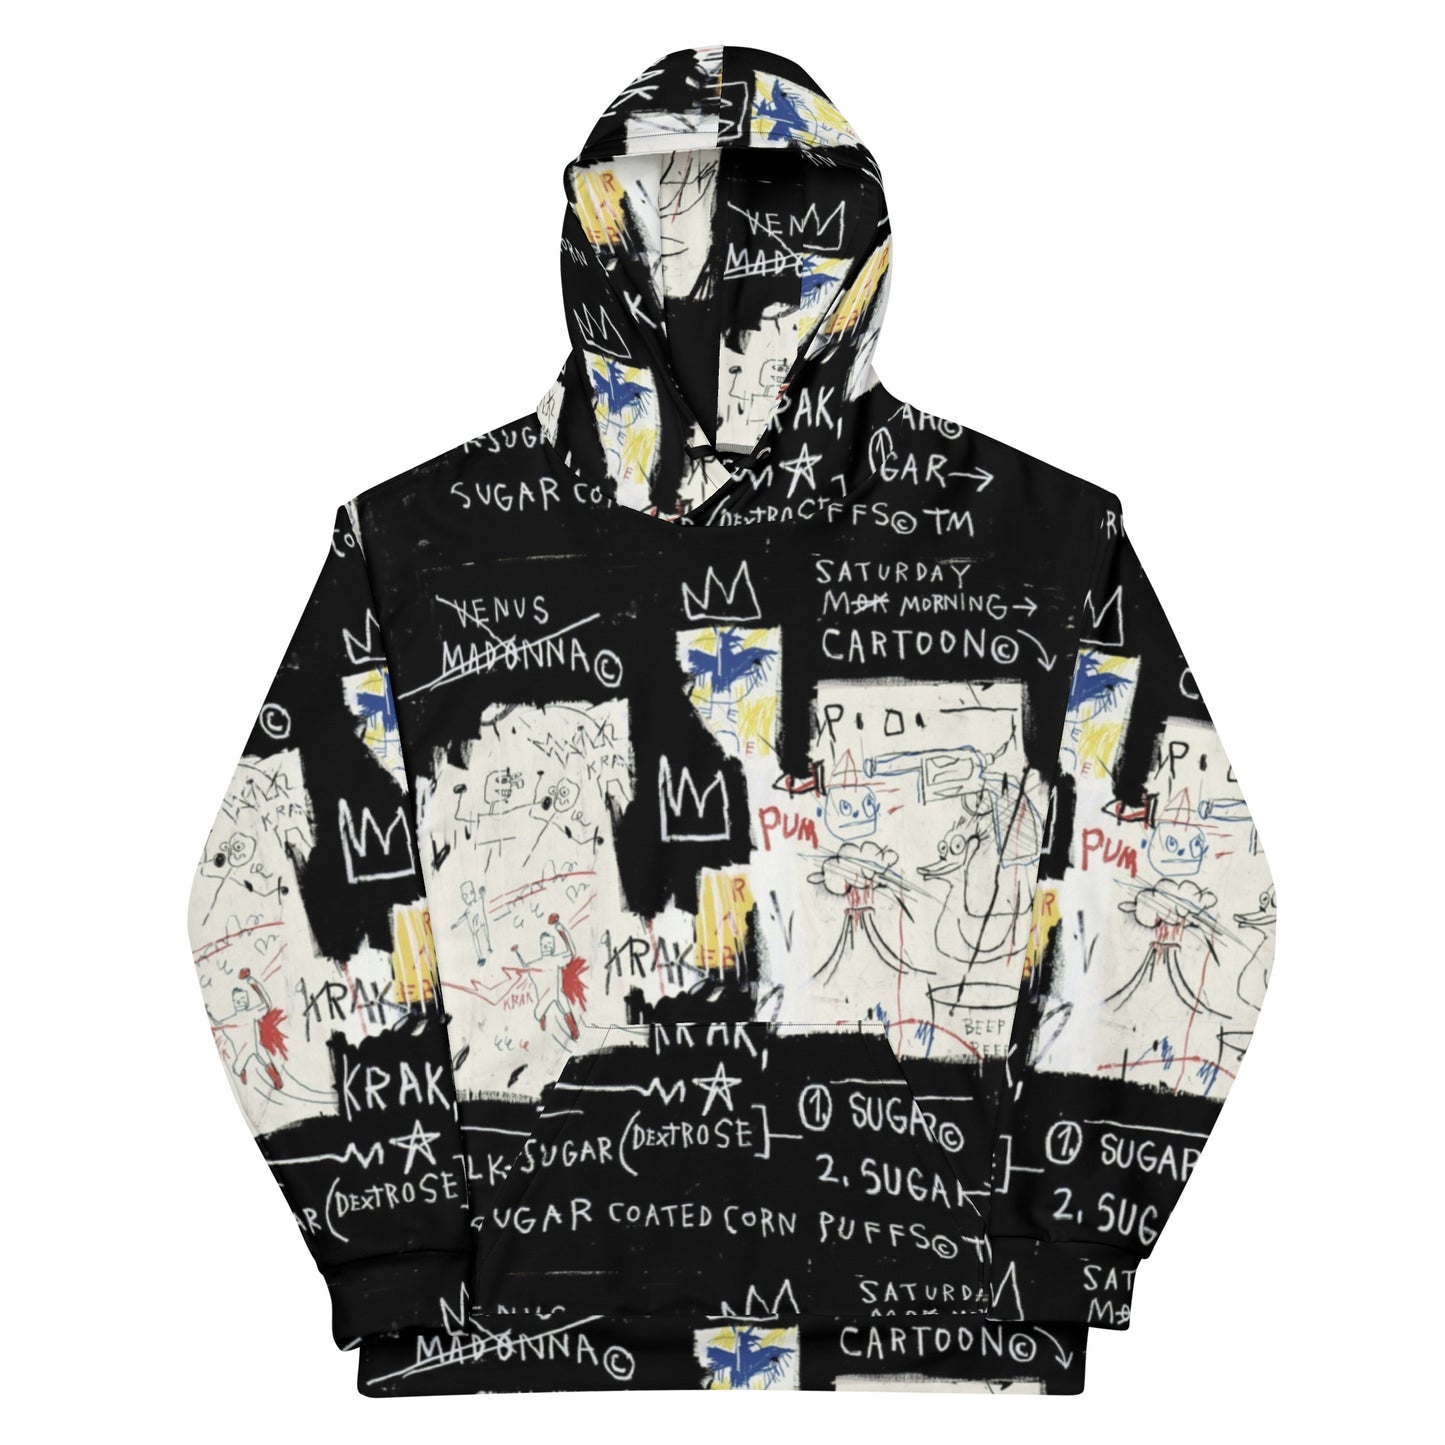 Jean-Michel Basquiat "A Panel of Experts" Artwork All Over Printed Black and White Sweatshirt Hoodie Scattered Streetwear